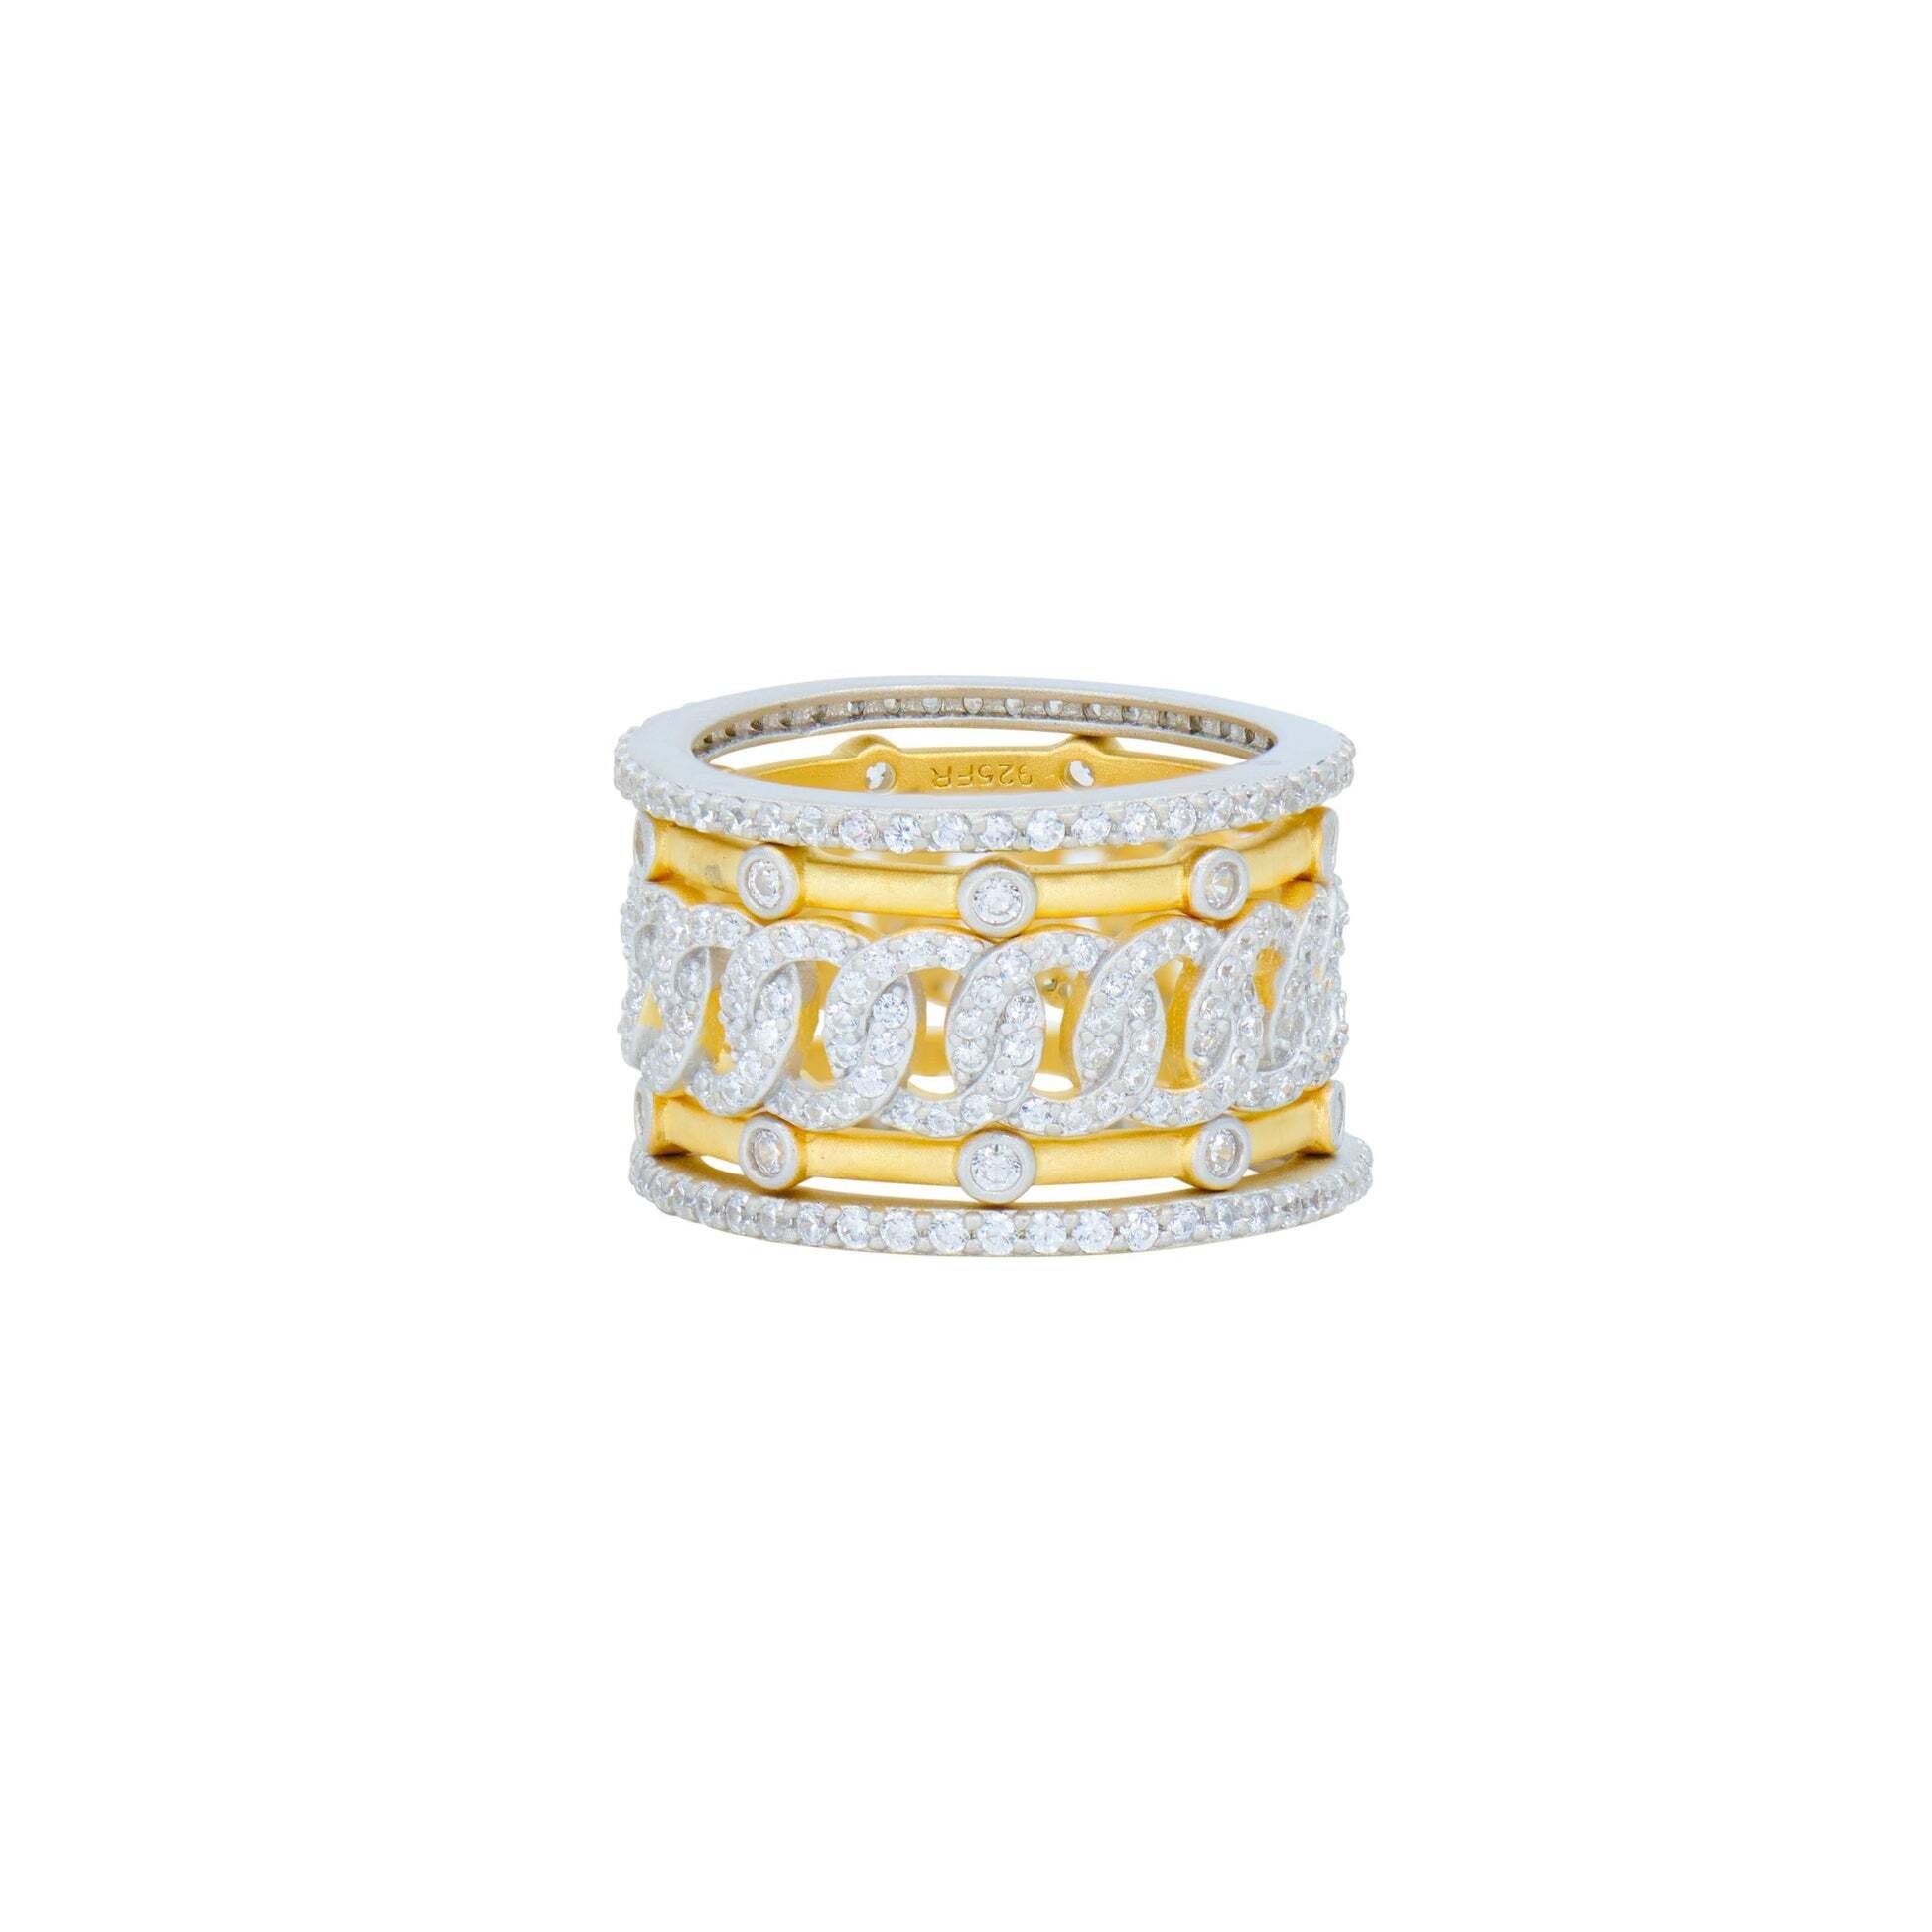 Chain Of Shine 5-stack Ring